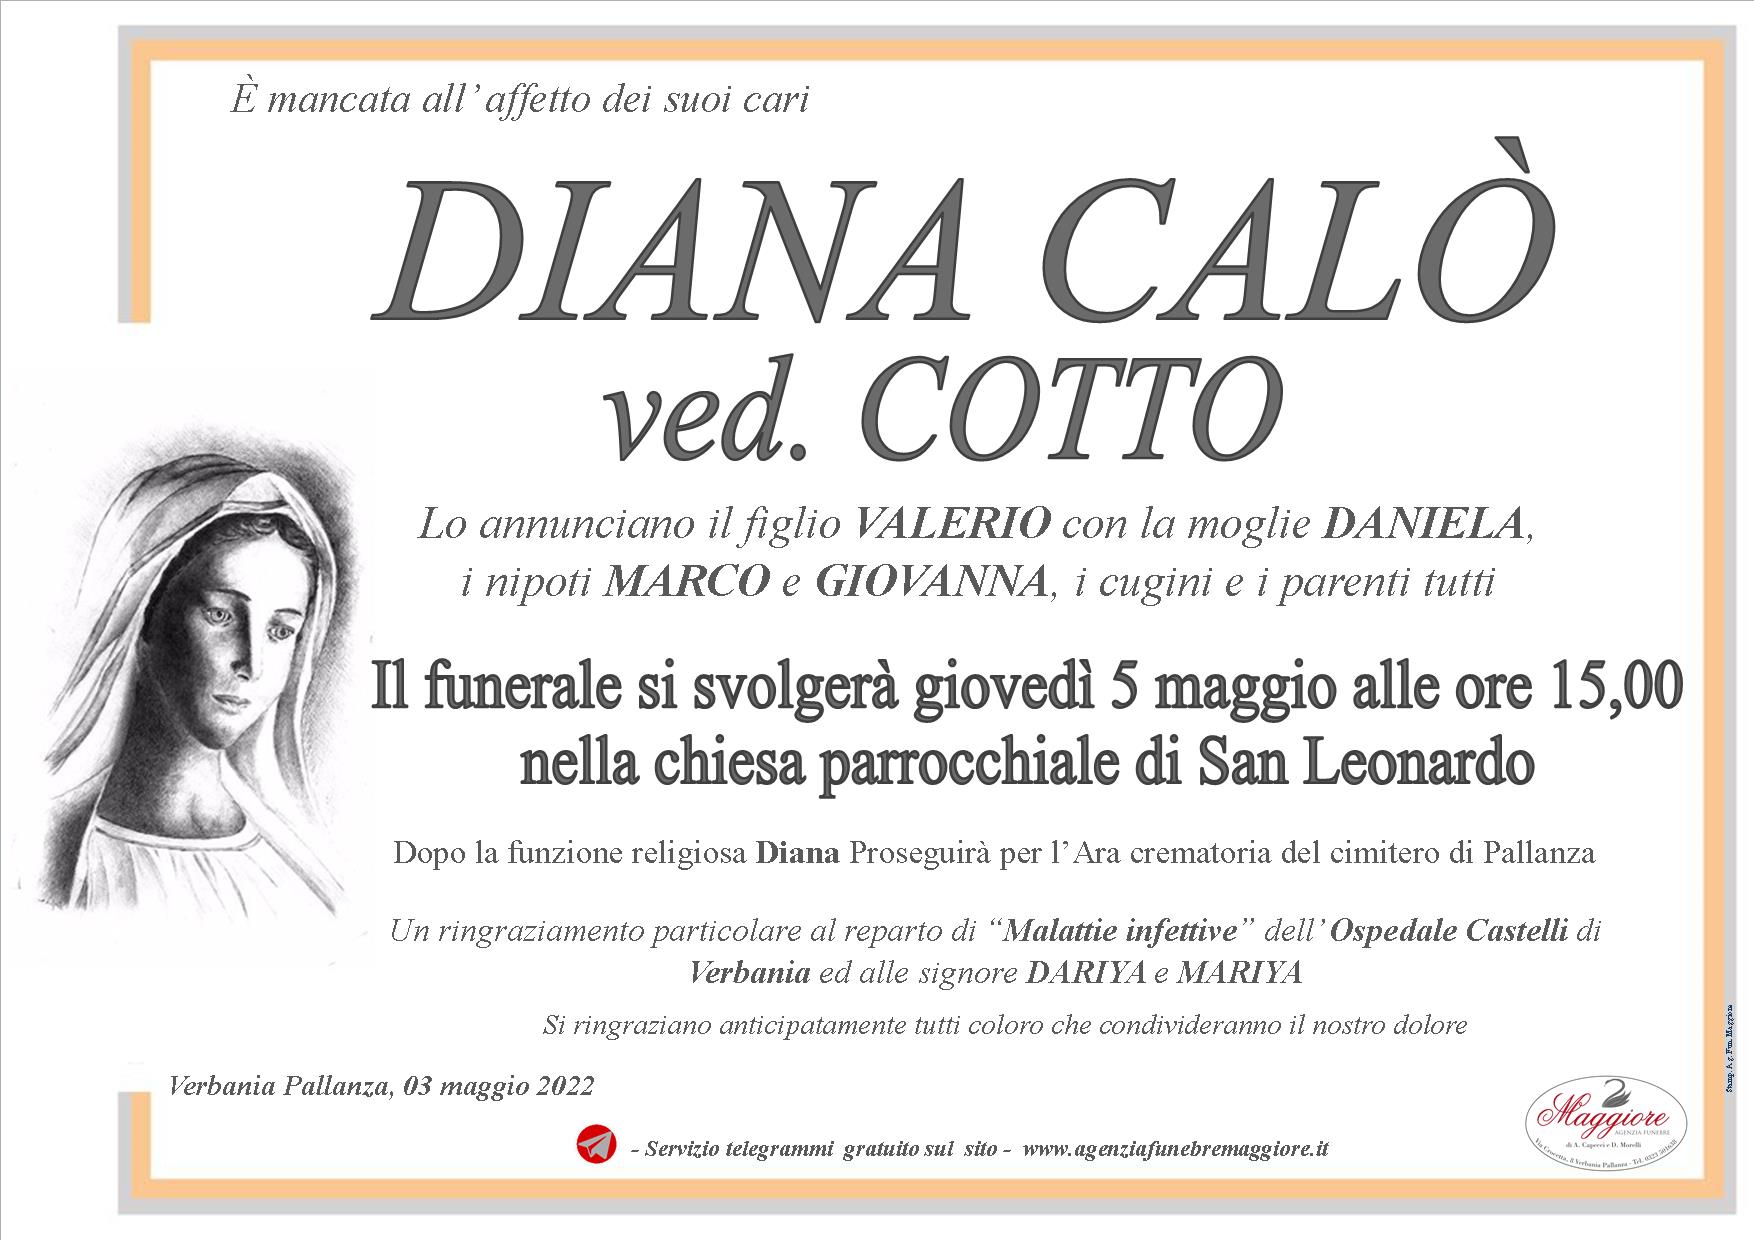 Diana Calò ved. Cotto